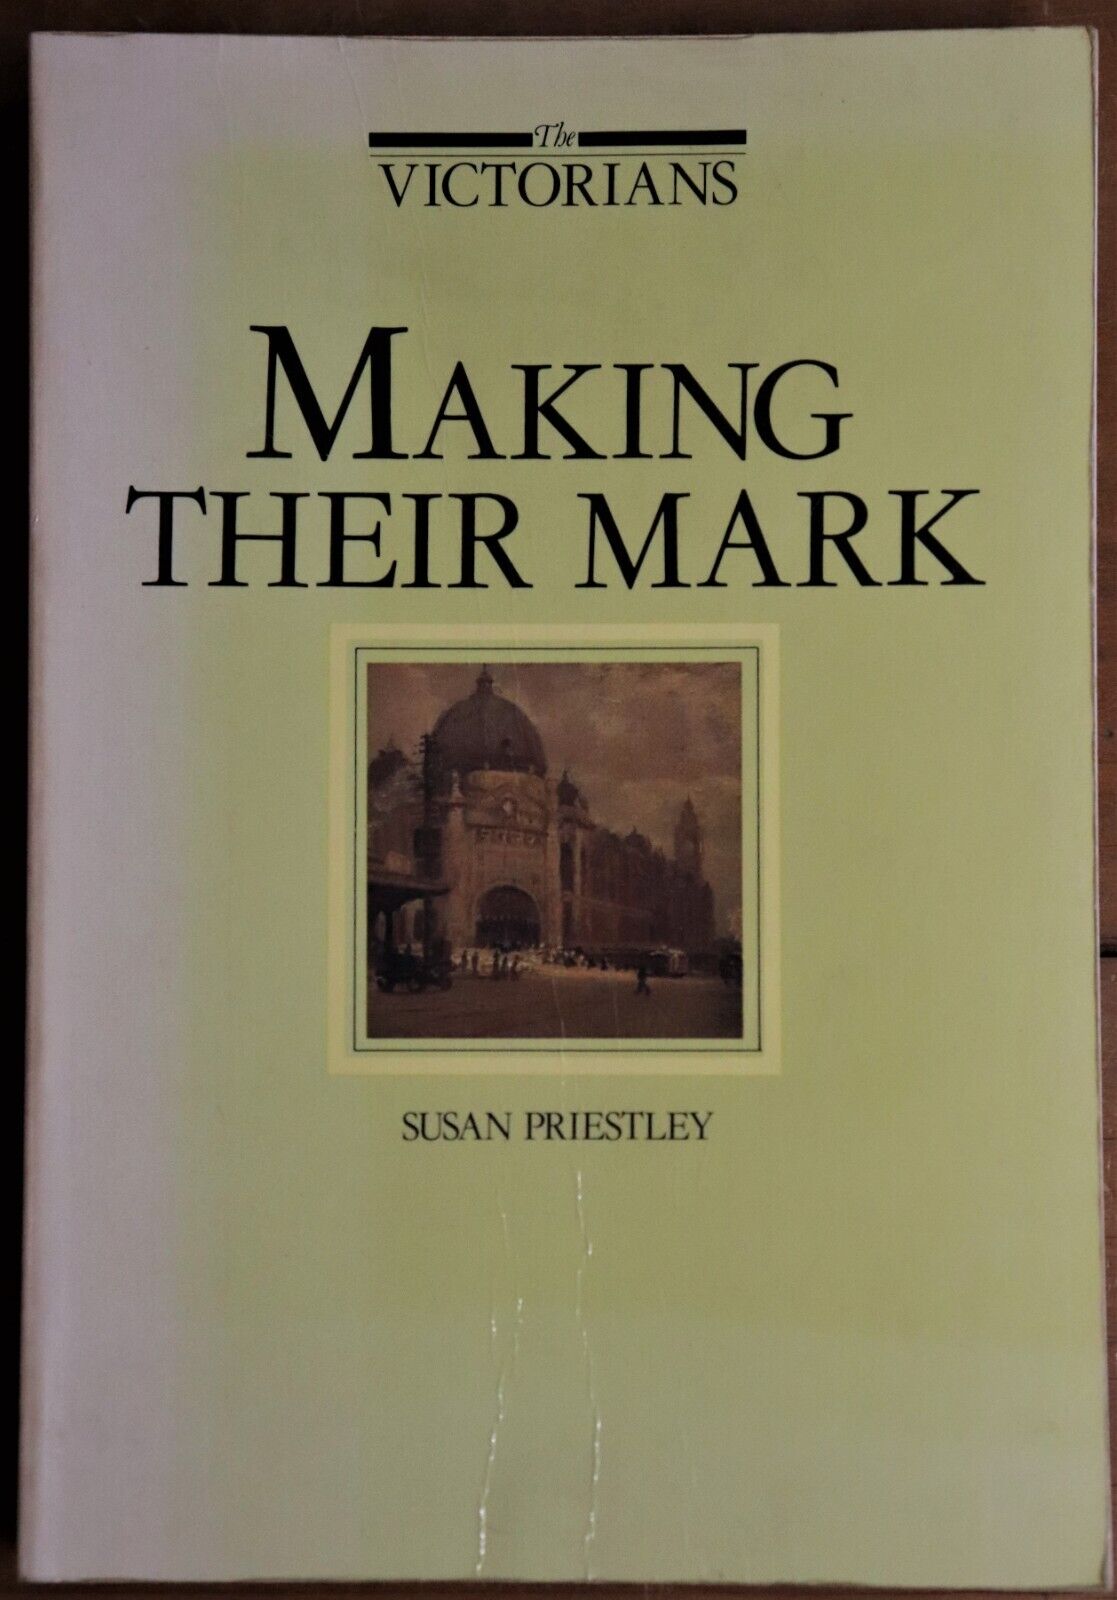 The Victorians: Making Their Mark - 1984 - Australian History Book 1st Edition